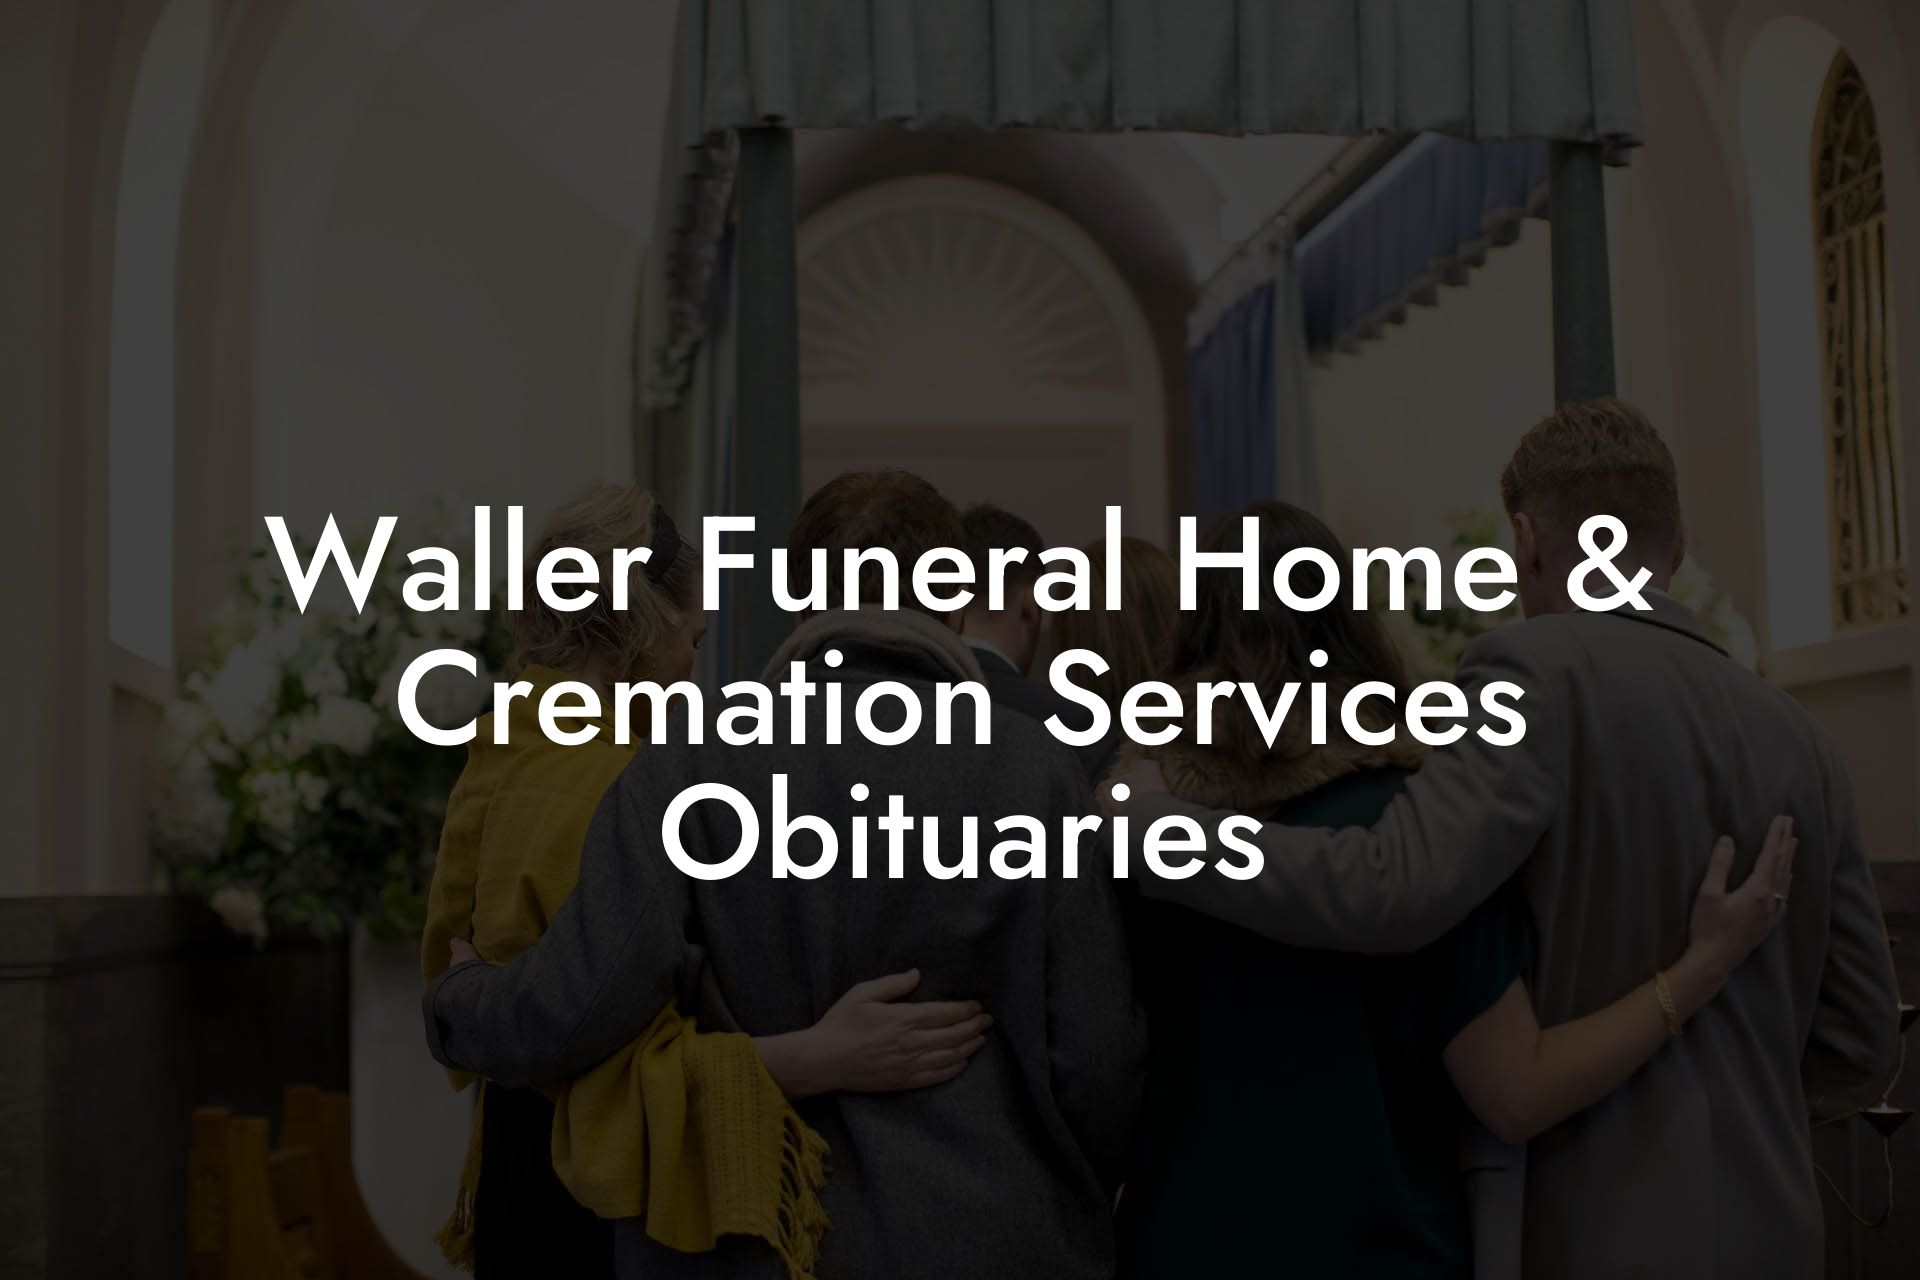 Waller Funeral Home & Cremation Services Obituaries Eulogy Assistant